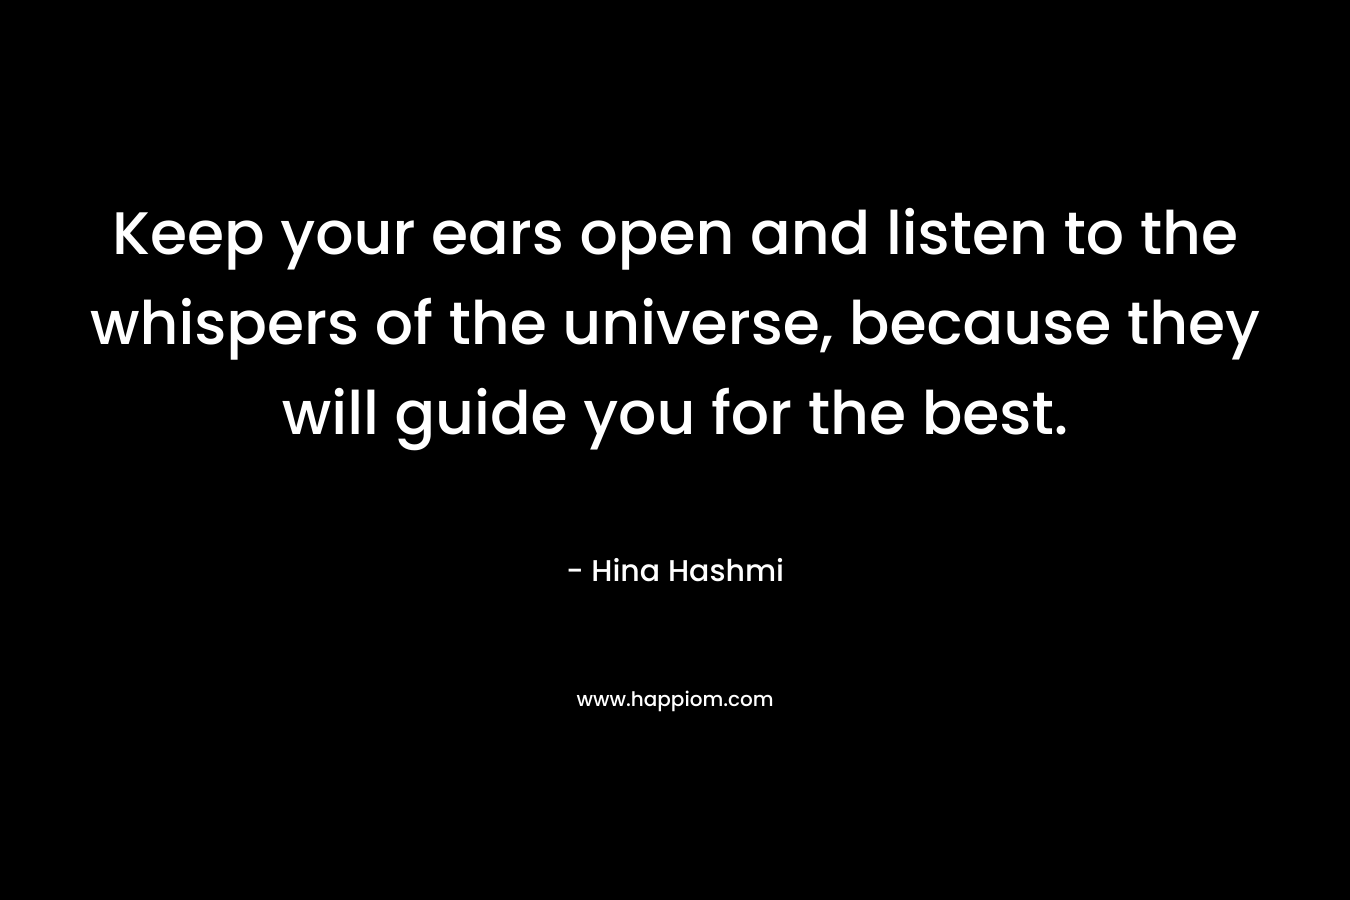 Keep your ears open and listen to the whispers of the universe, because they will guide you for the best. – Hina Hashmi